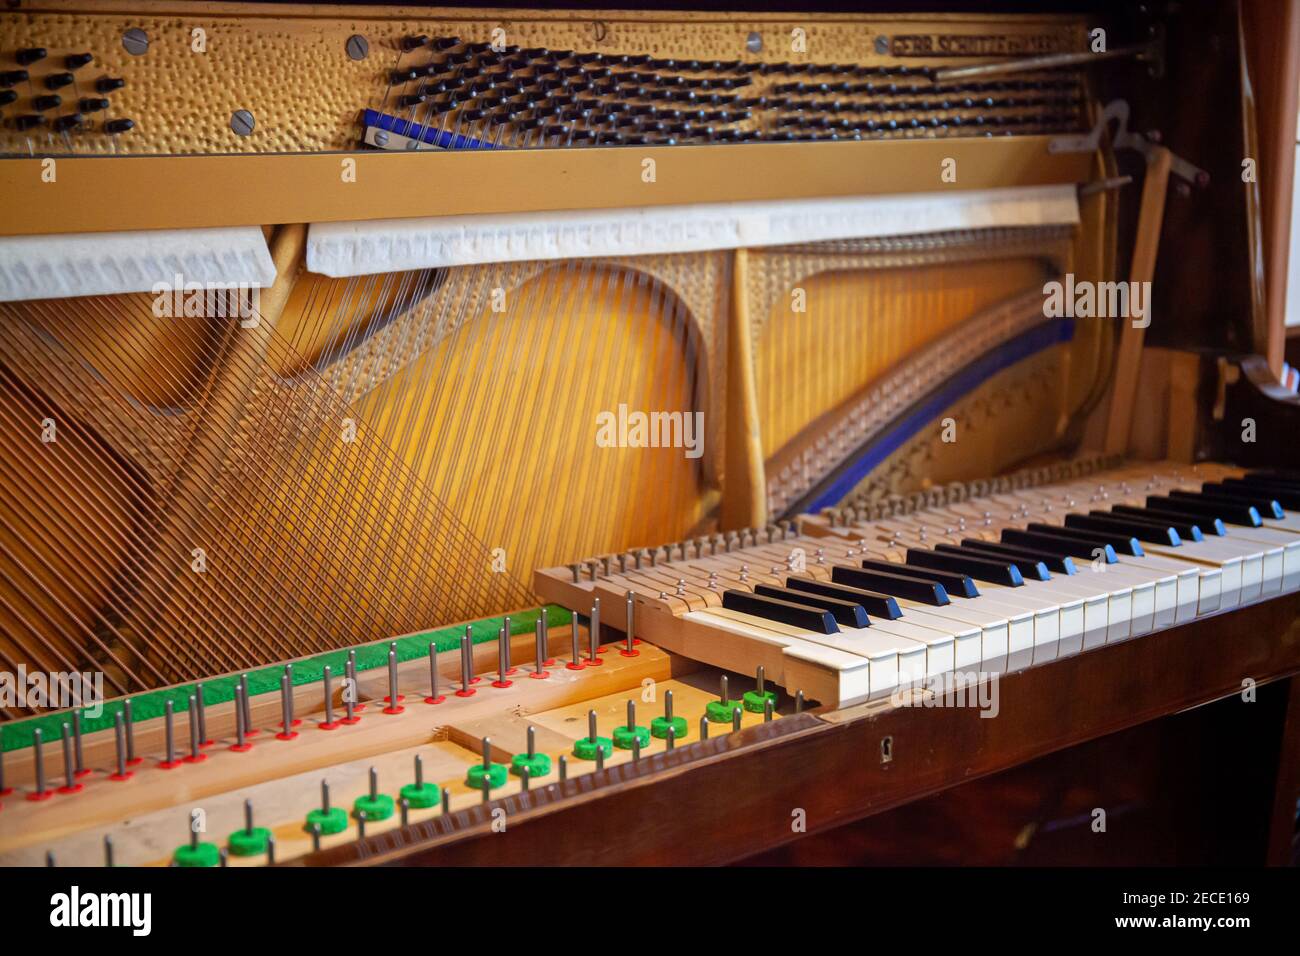 Disassembled upright piano for repair, service, tuning, cleaning. Open piano with sound board and string visible. Stock Photo